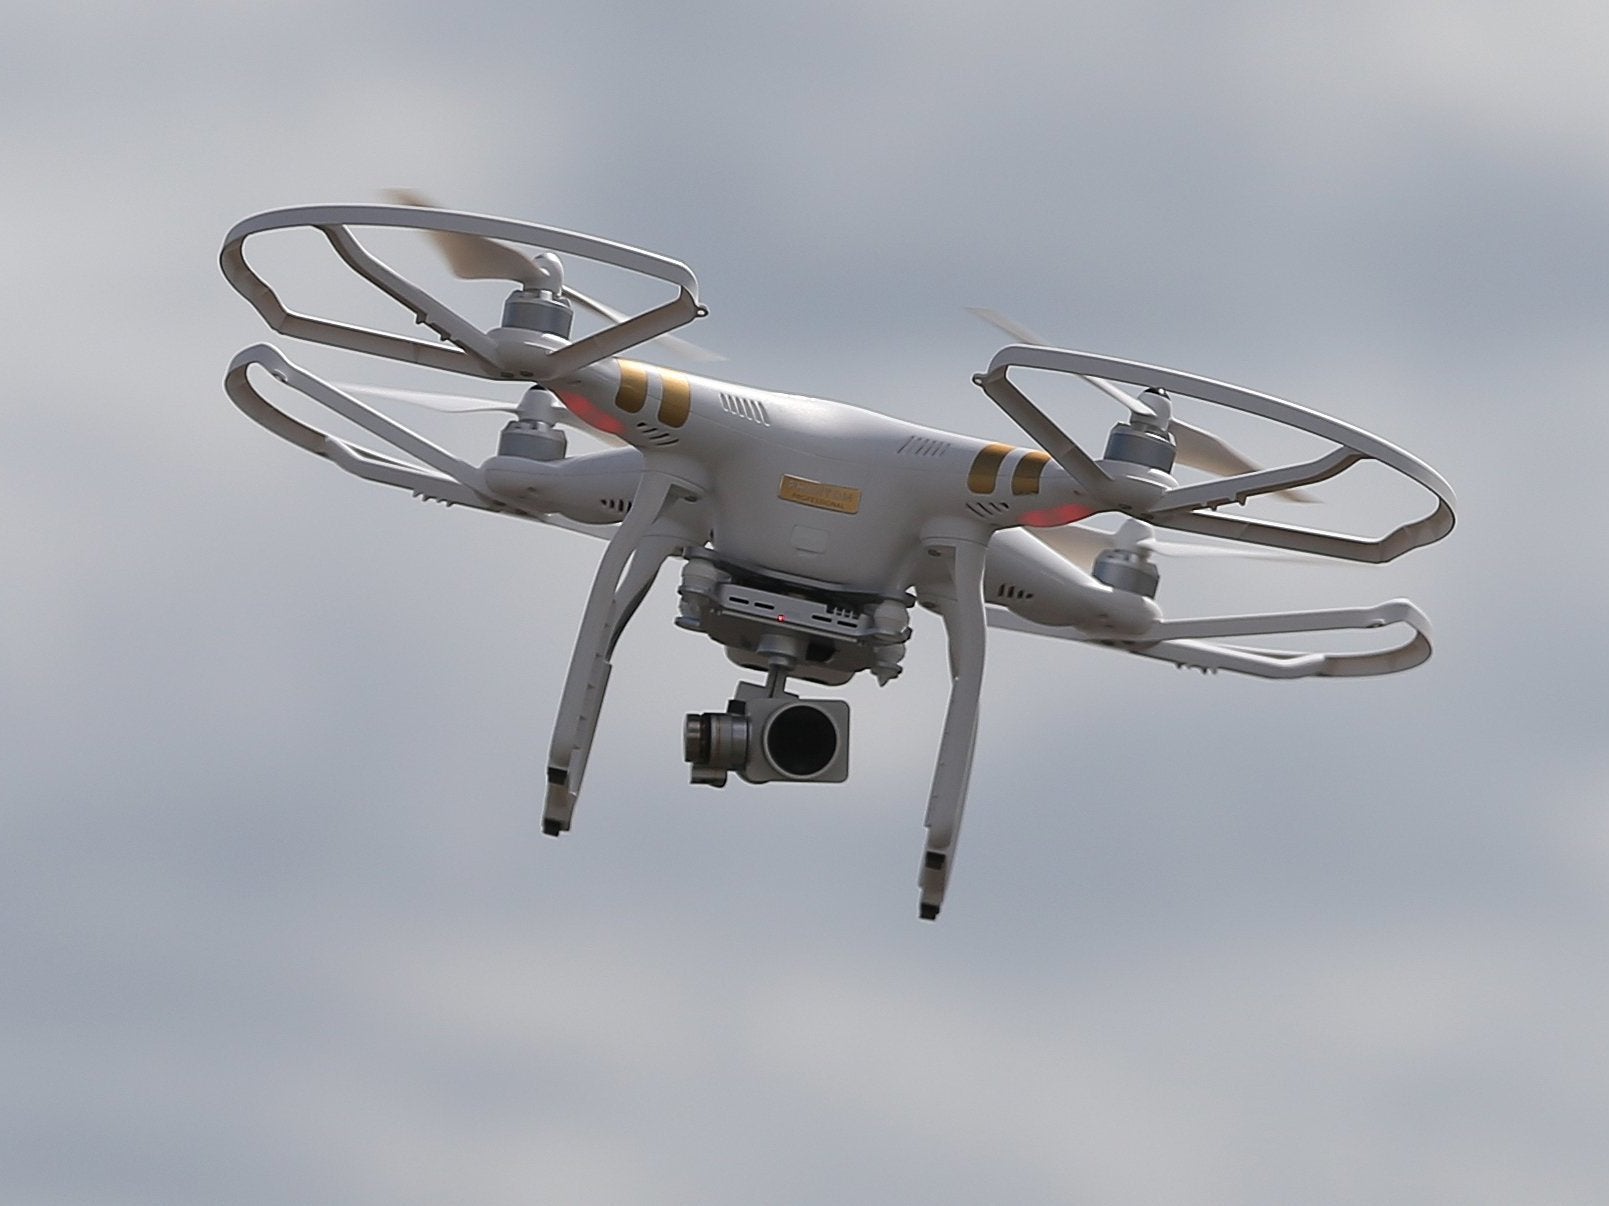 Drone near-misses have been rising for five years